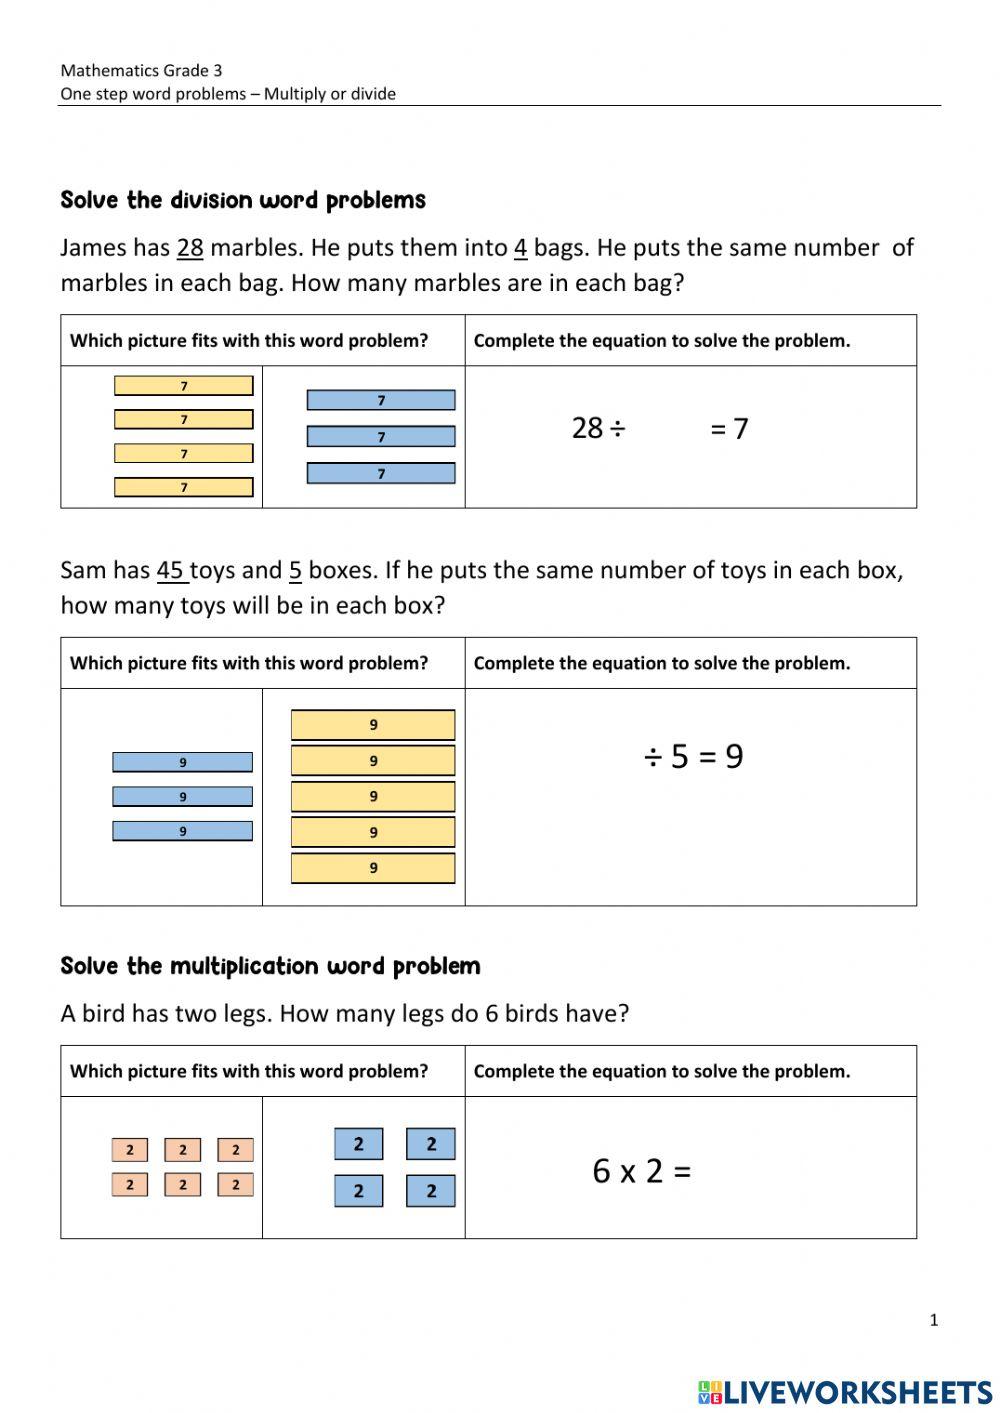 Solve word problems